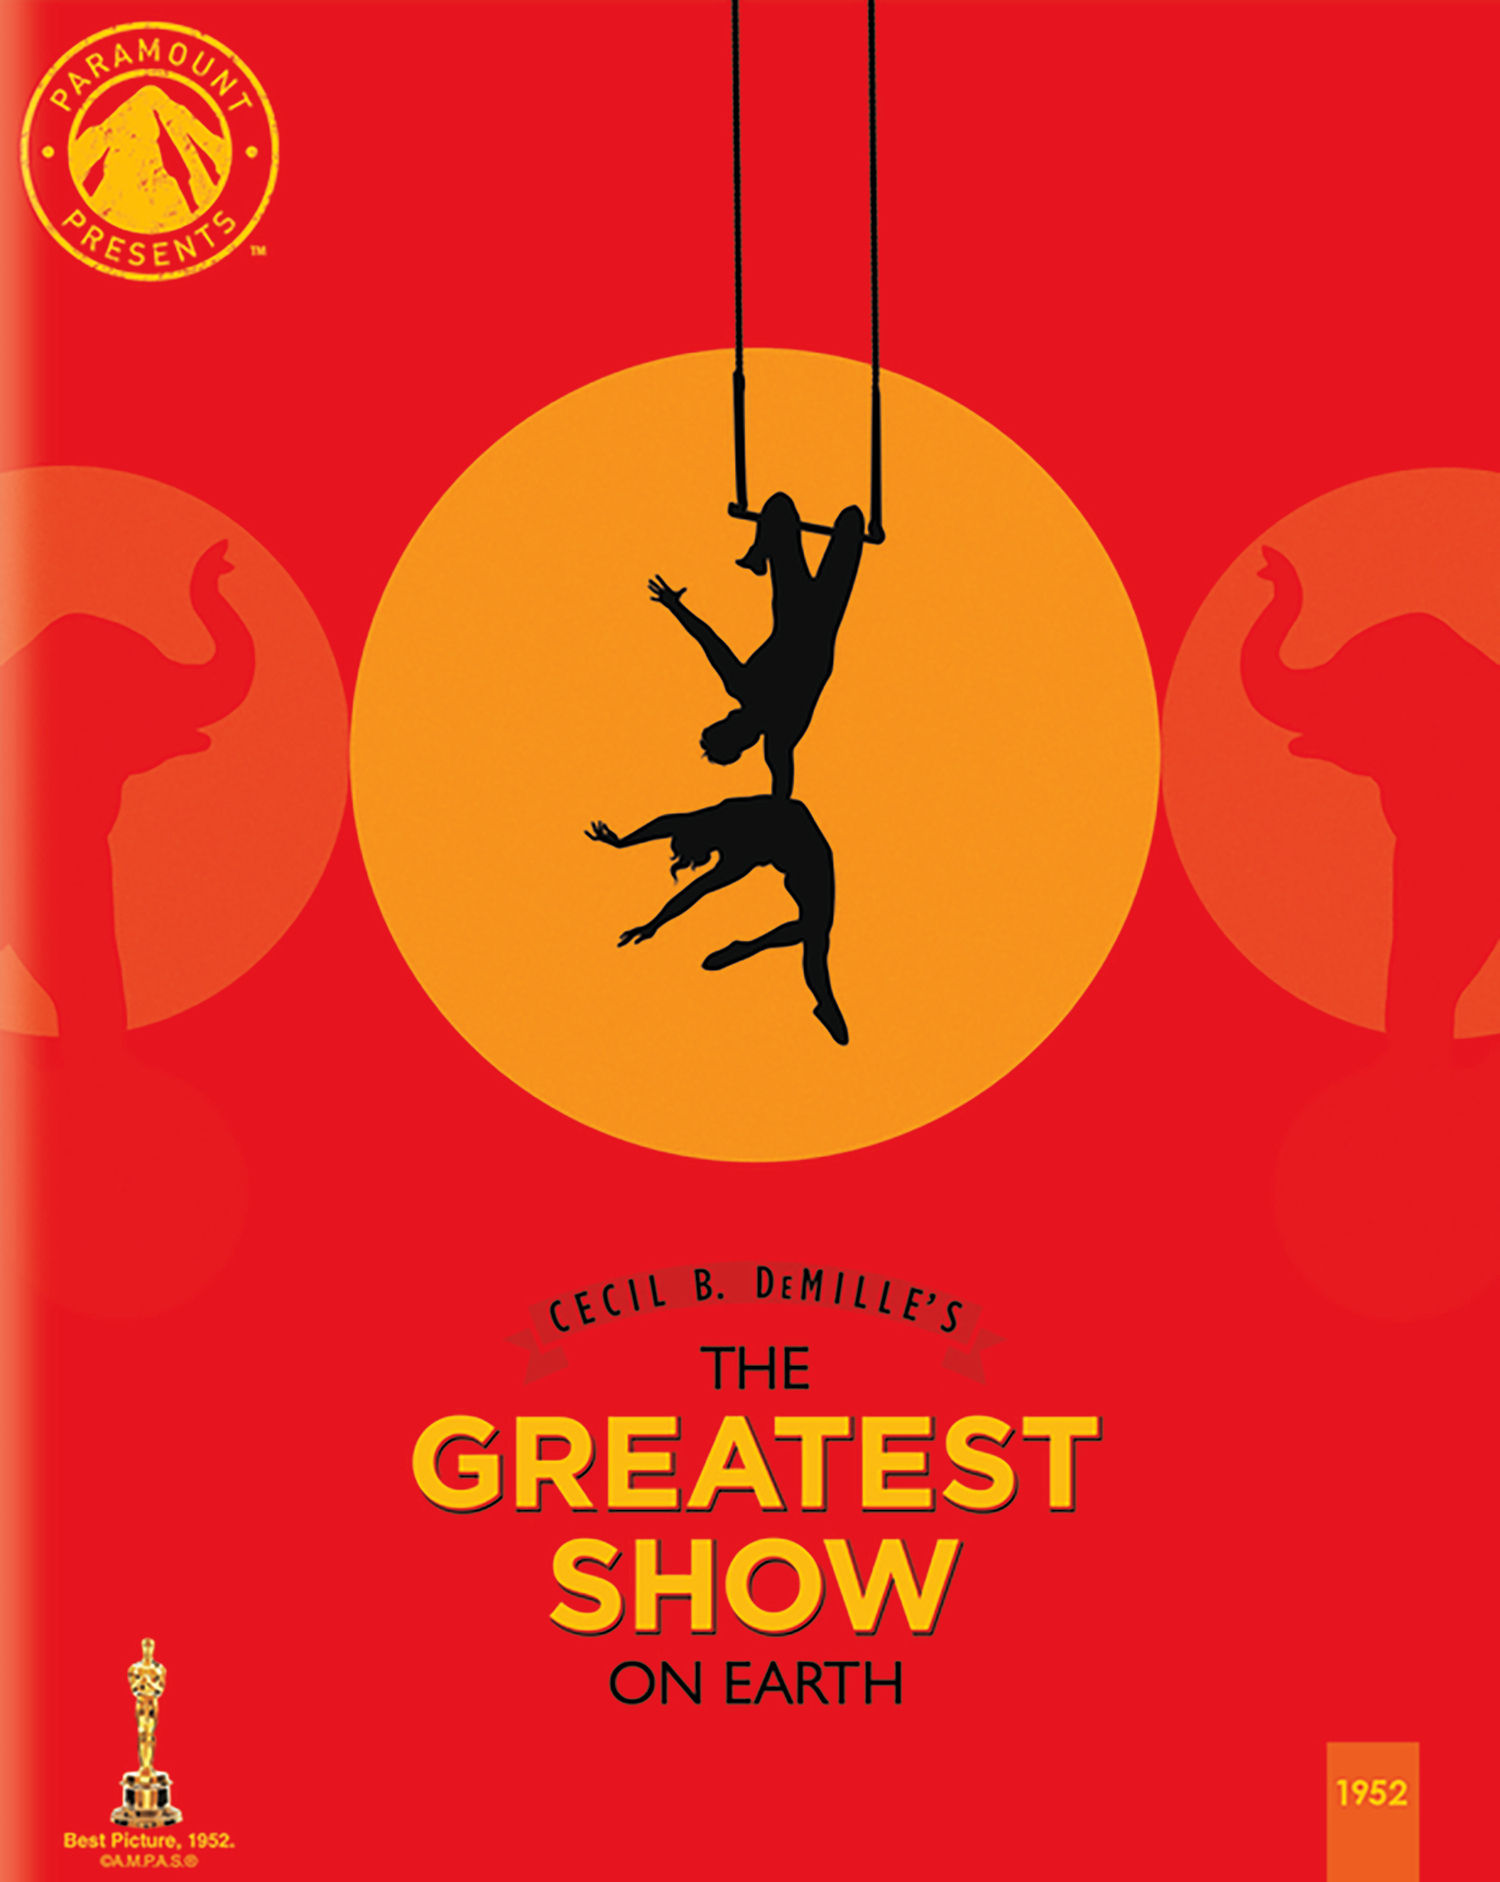 Paramount Presents The Greatest Show on Earth Bluray Review FlickDirect